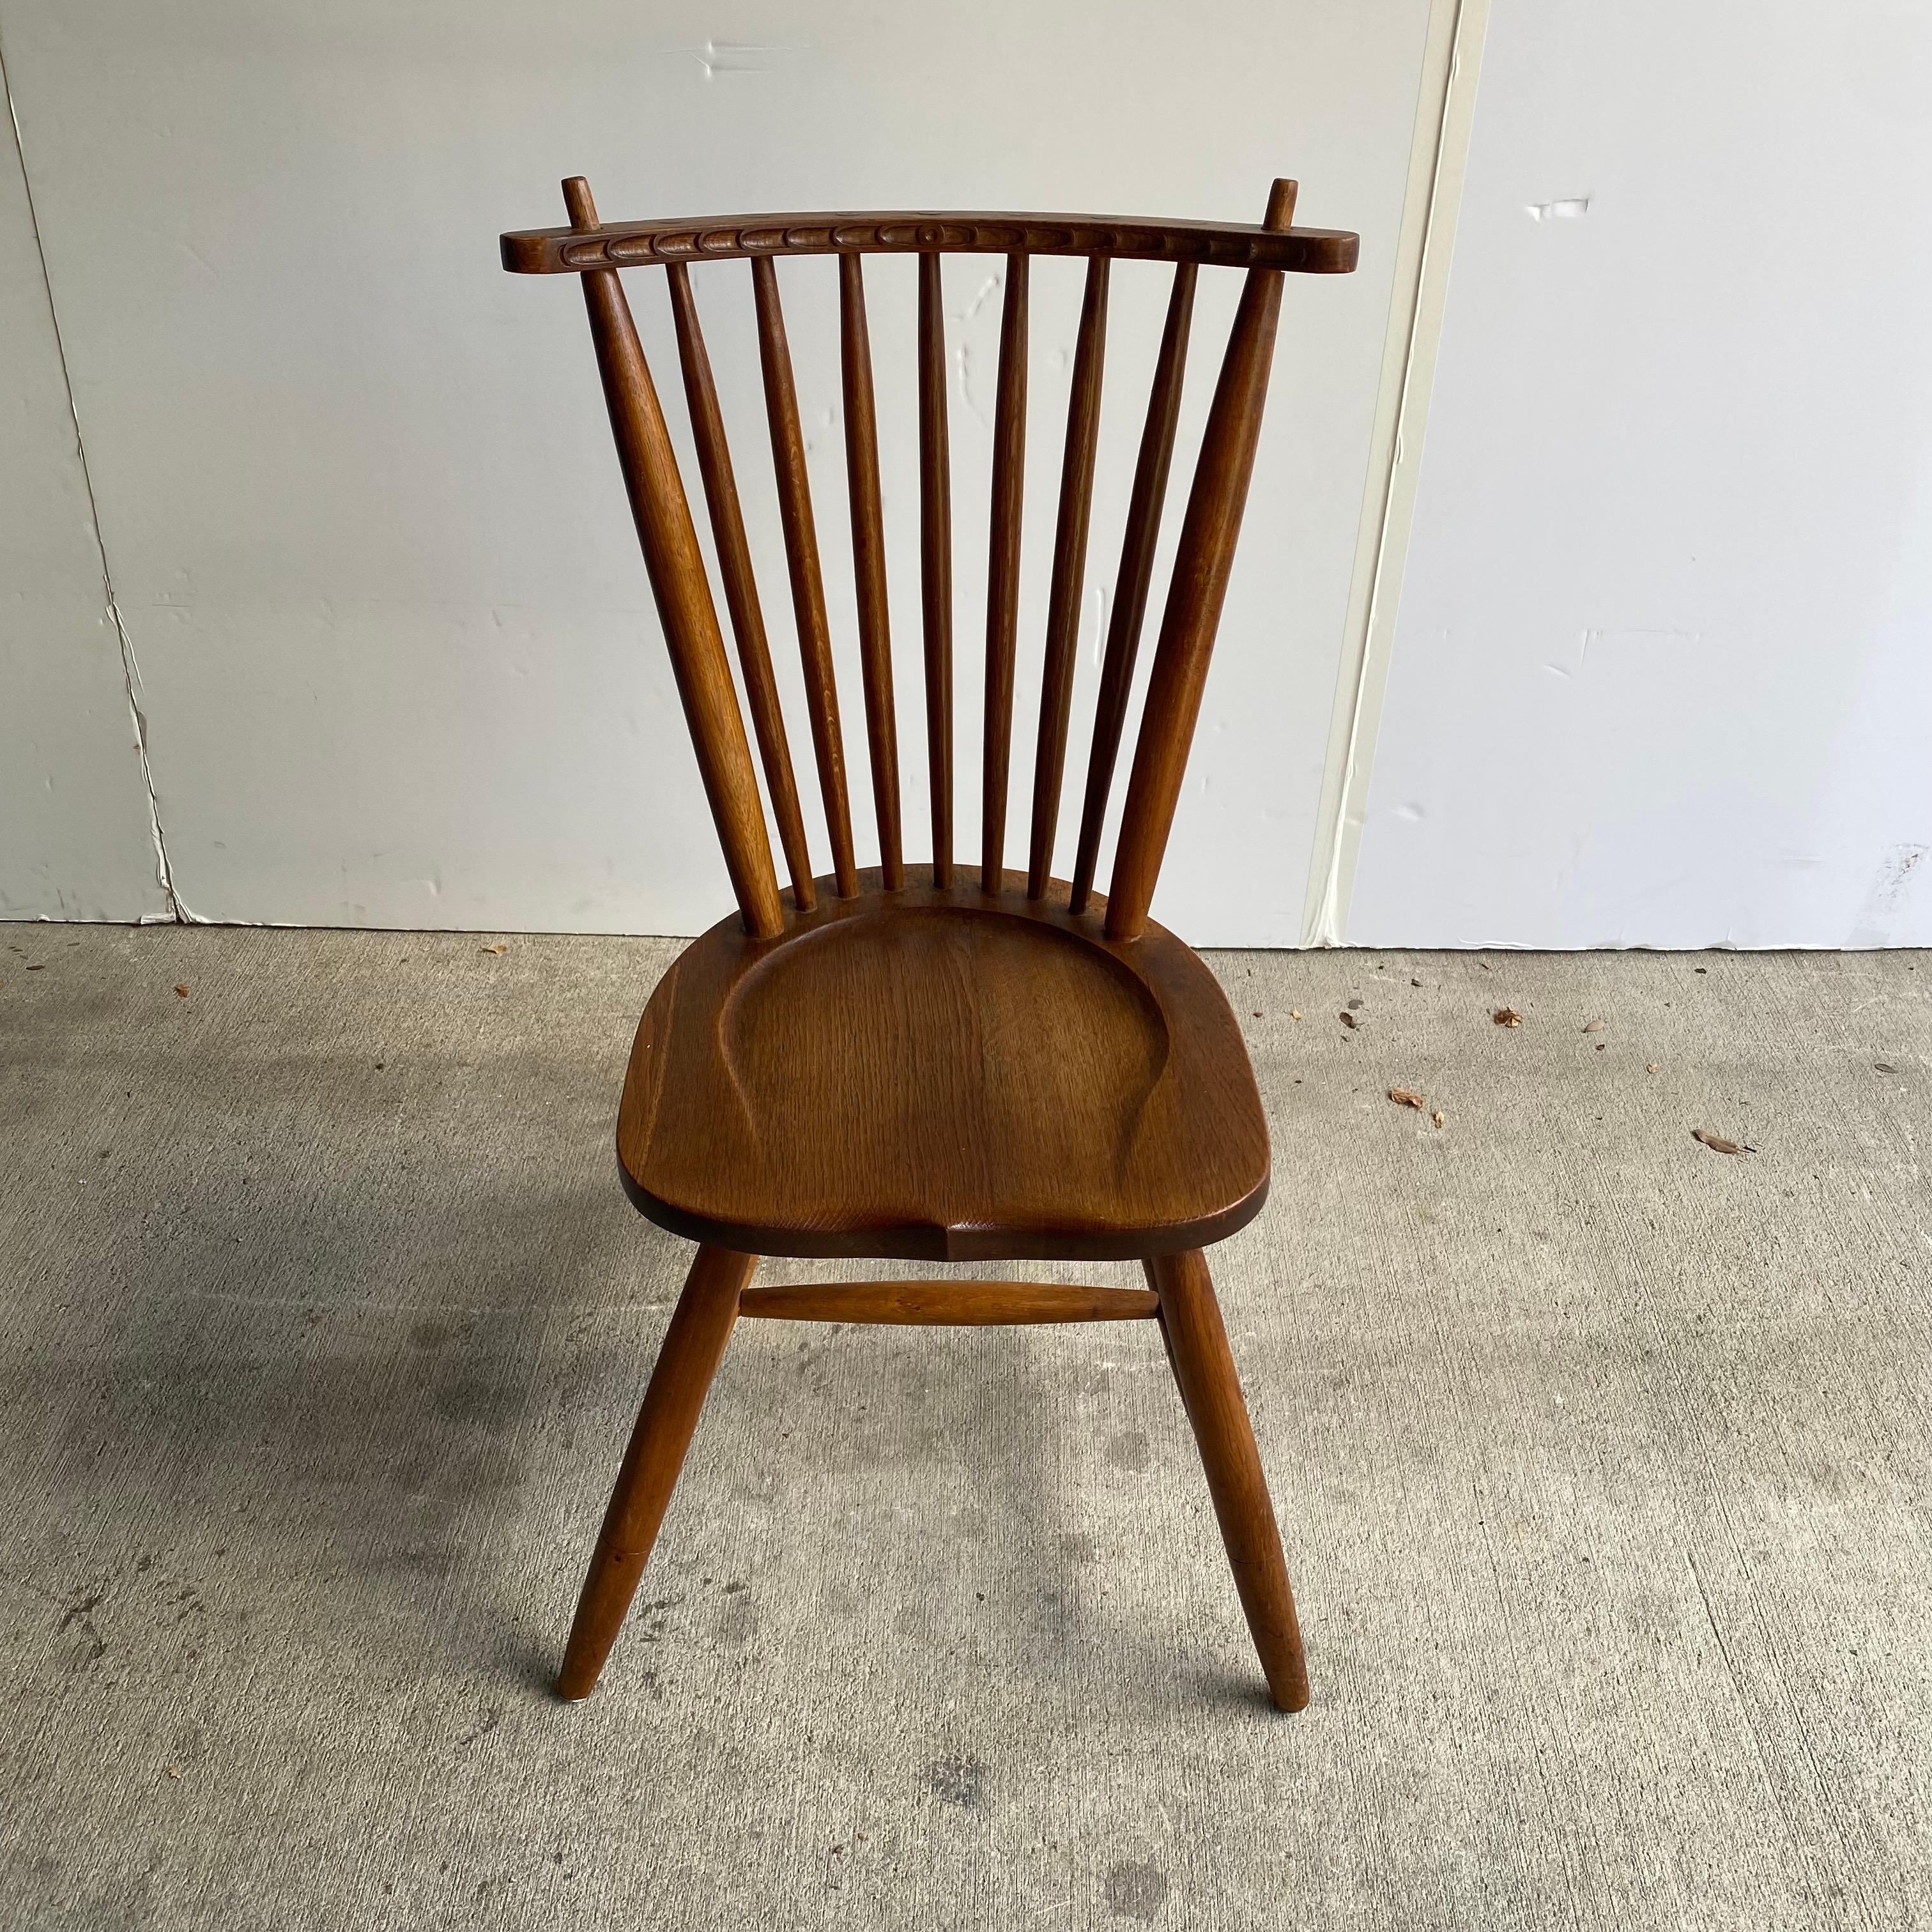 Classic Windsor chair styling meets Scandinavian modern. Spindle chair with splayed legs. Denmark, 1950's.